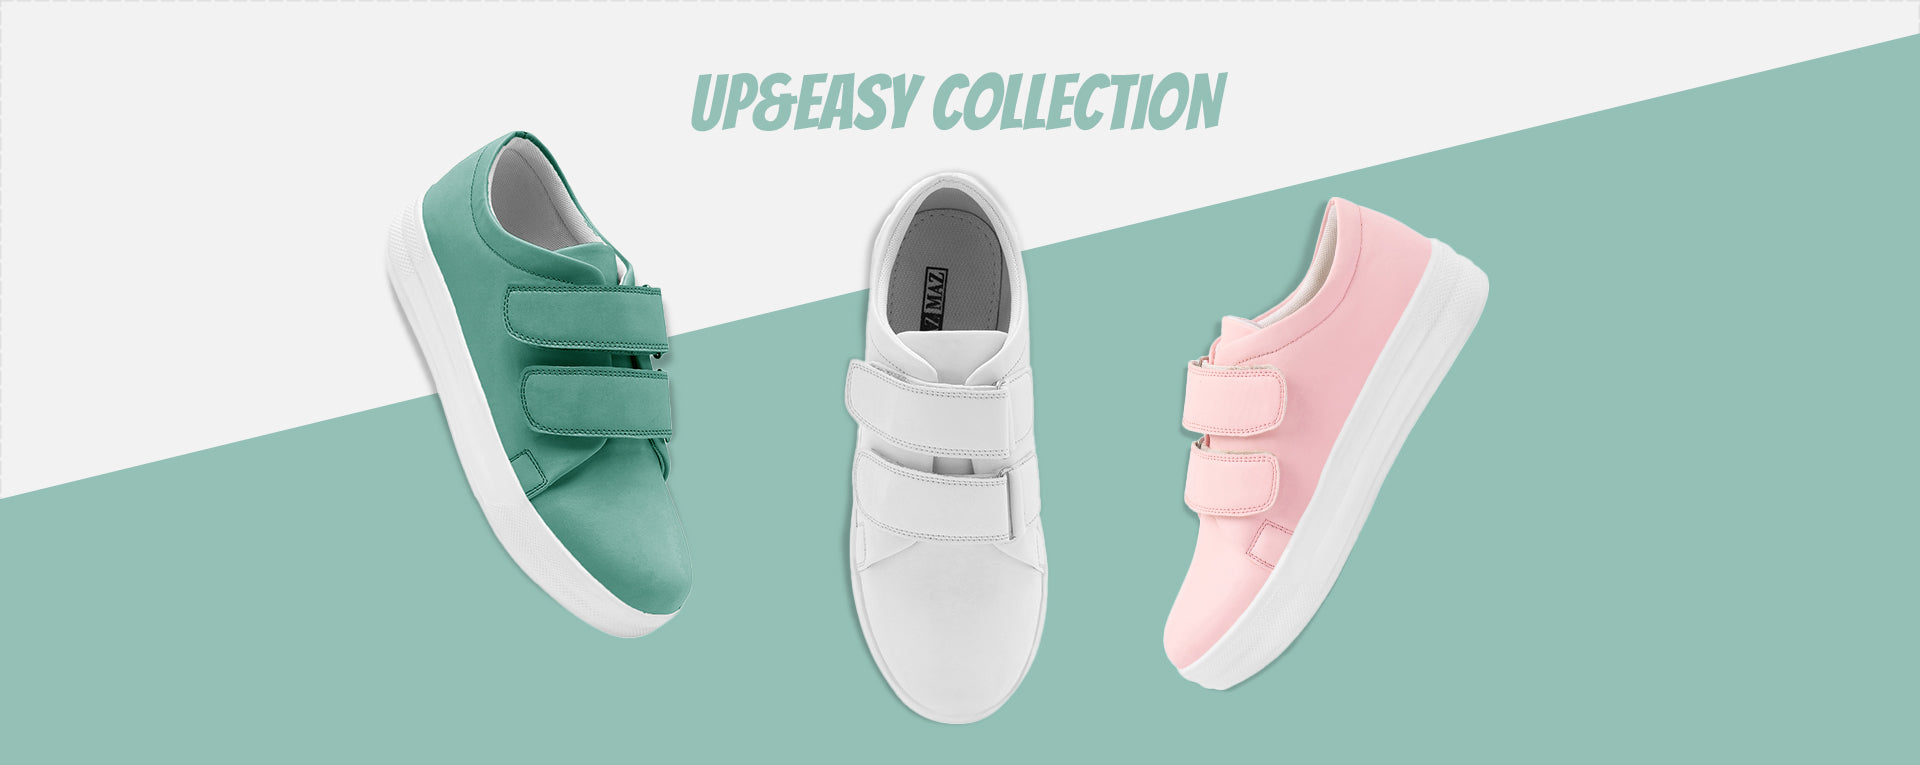 Up&Easy, Casual Sneaker Shoes for Women